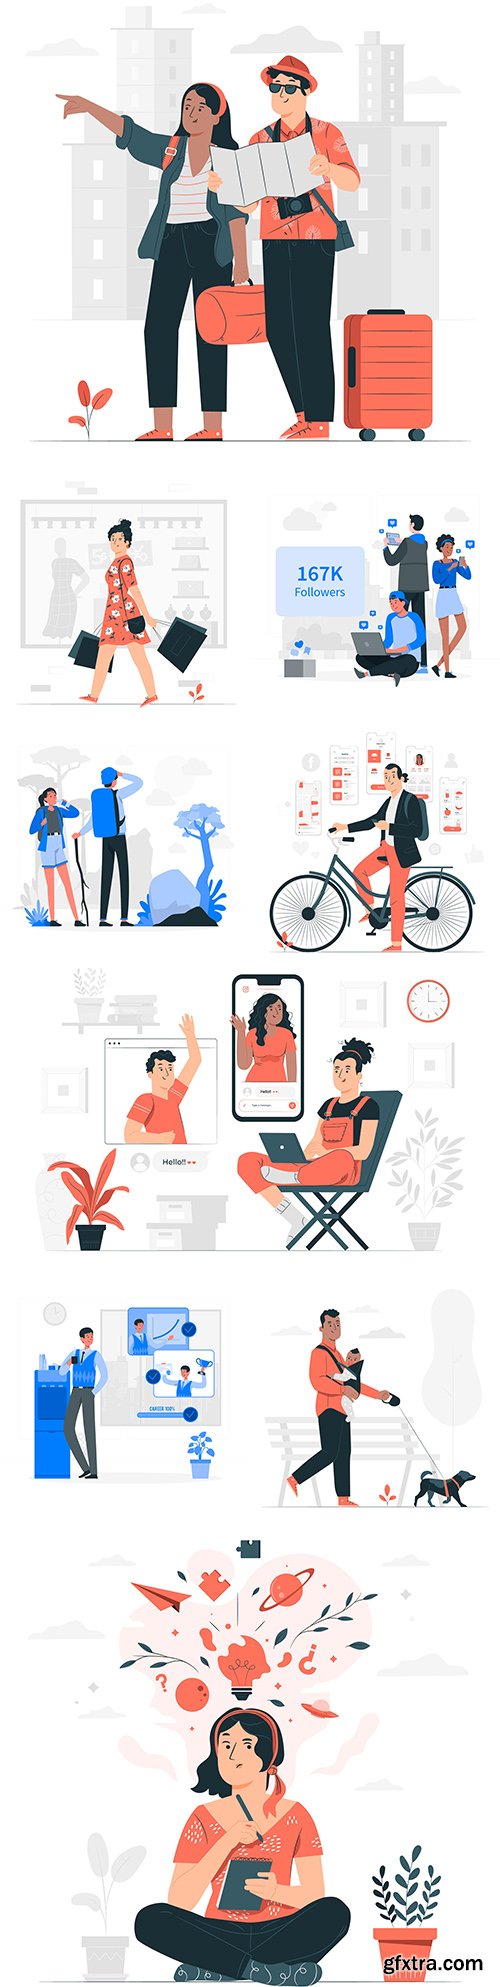 Communication people and different life situations concept illustrations